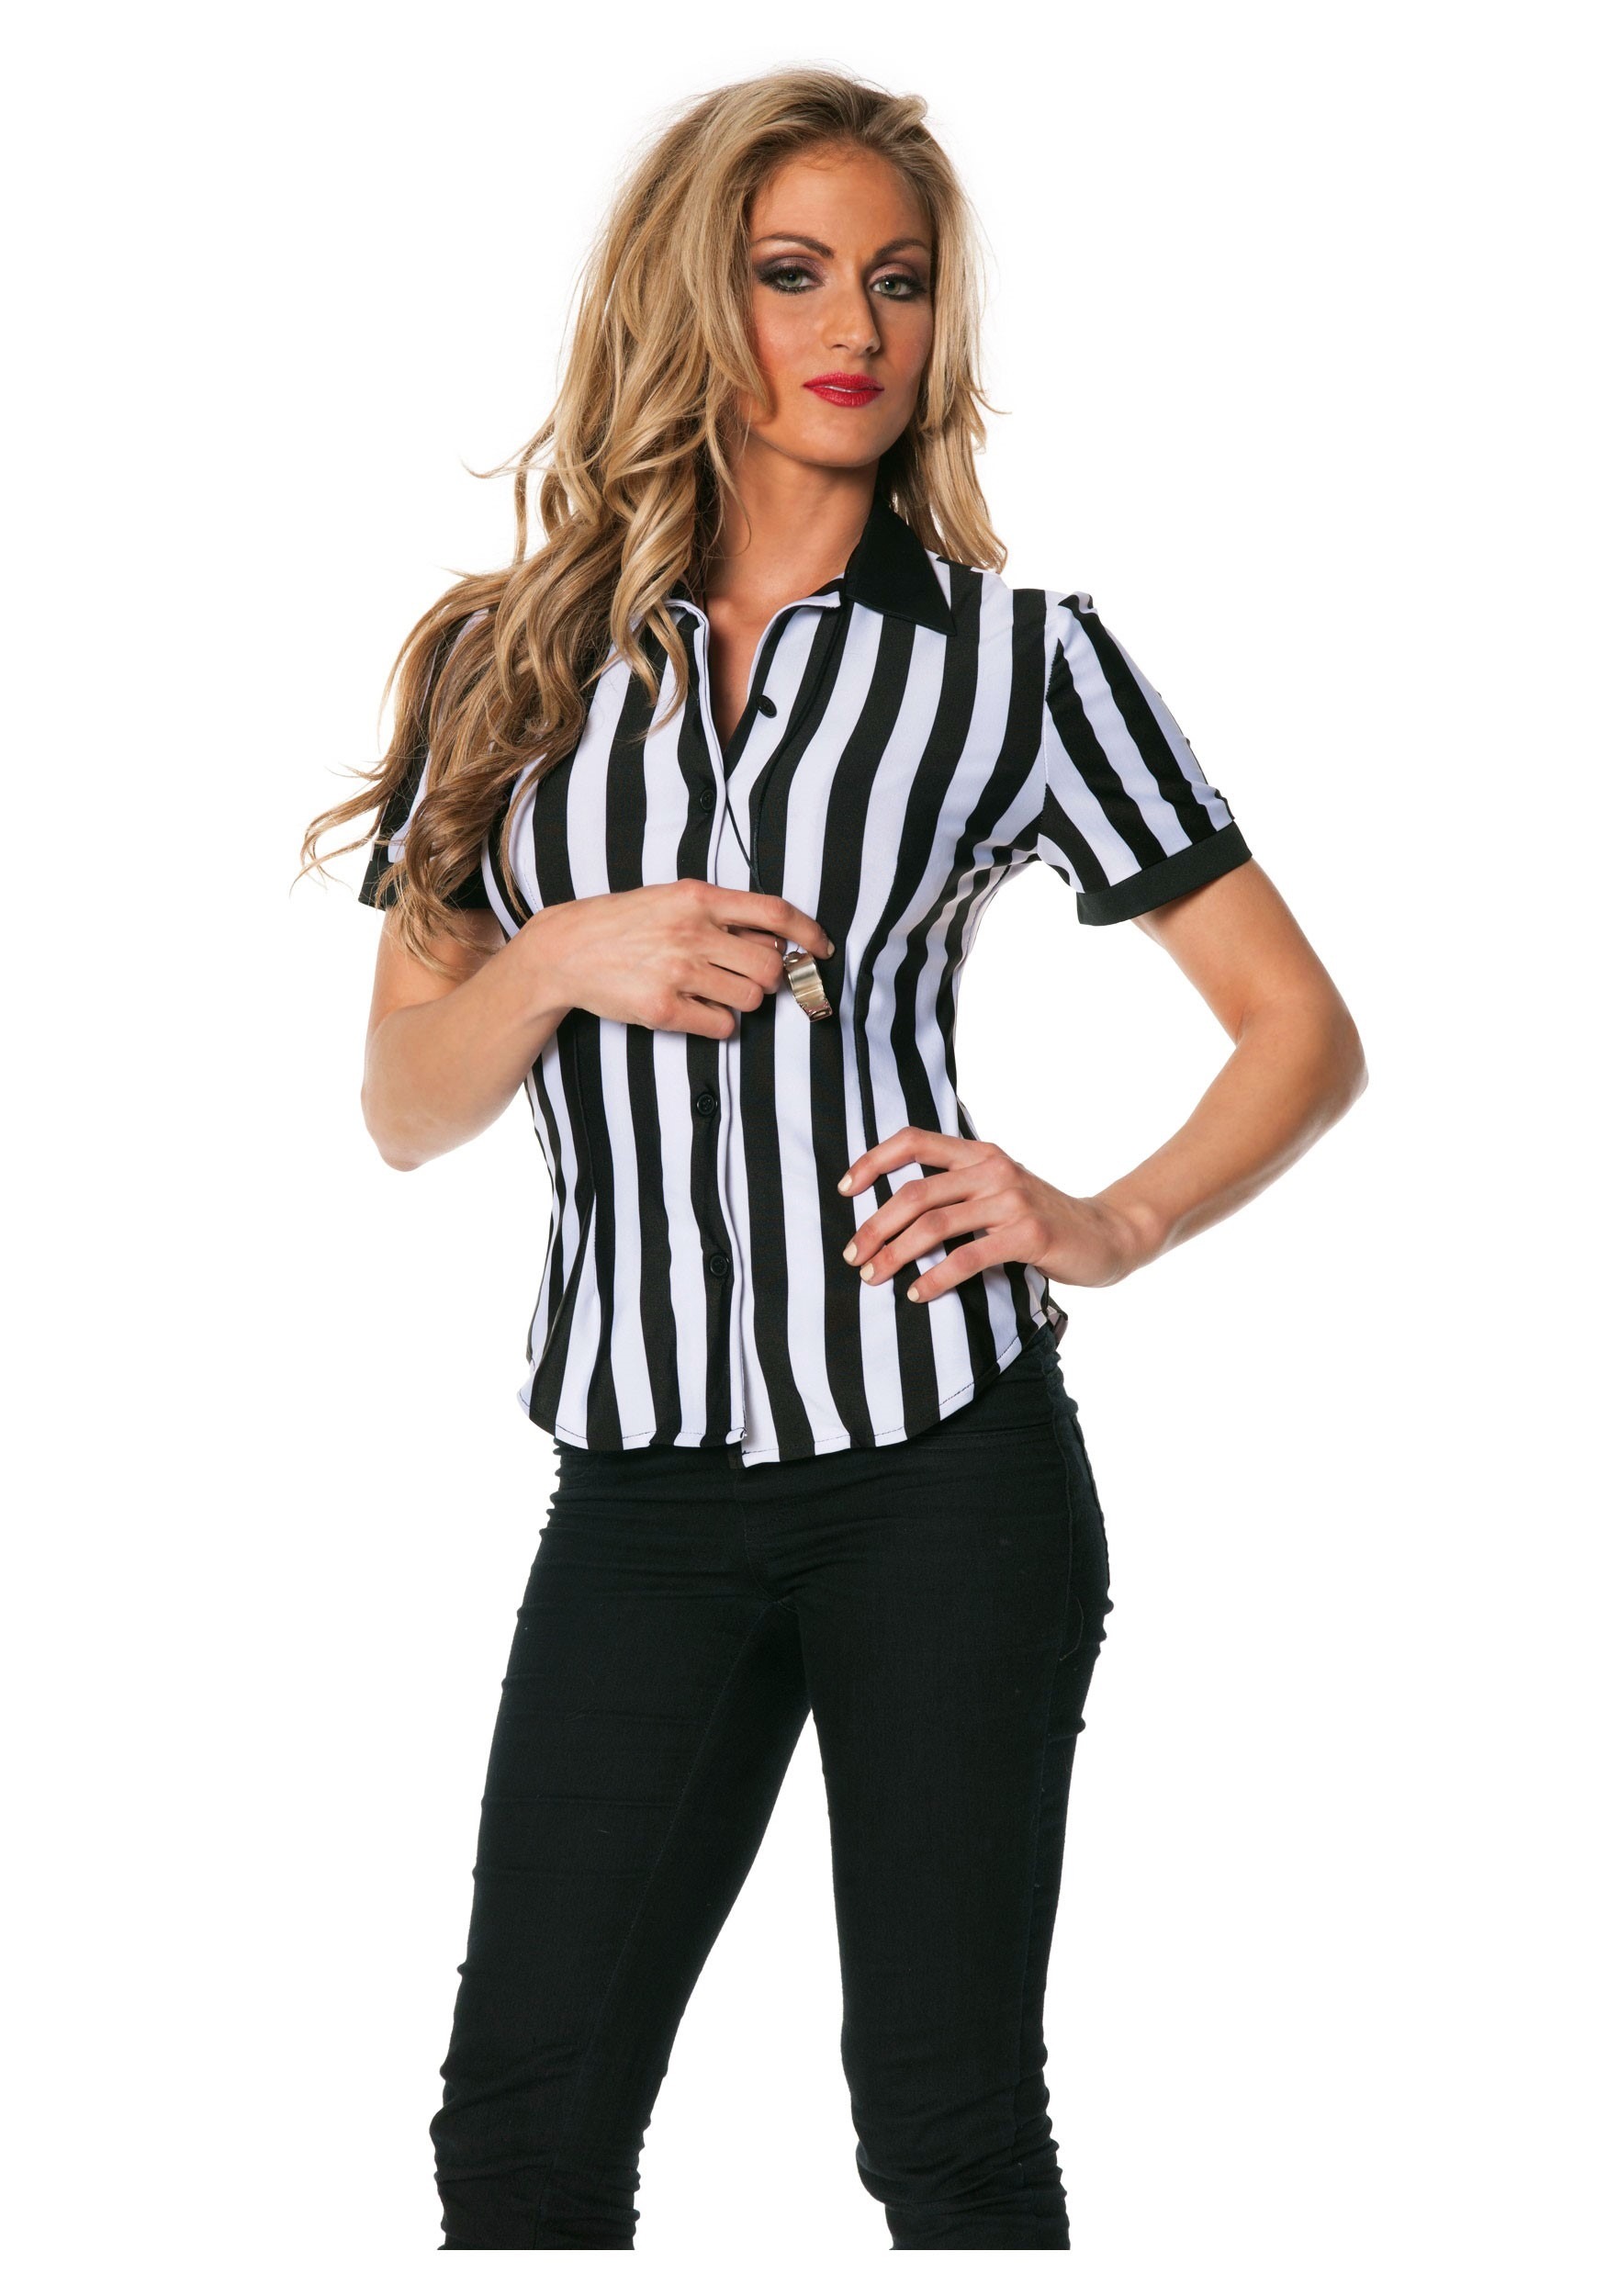 UnderWraps Women's Referee Fitted Costume Shirt 3X-Large 24 - image 1 of 2